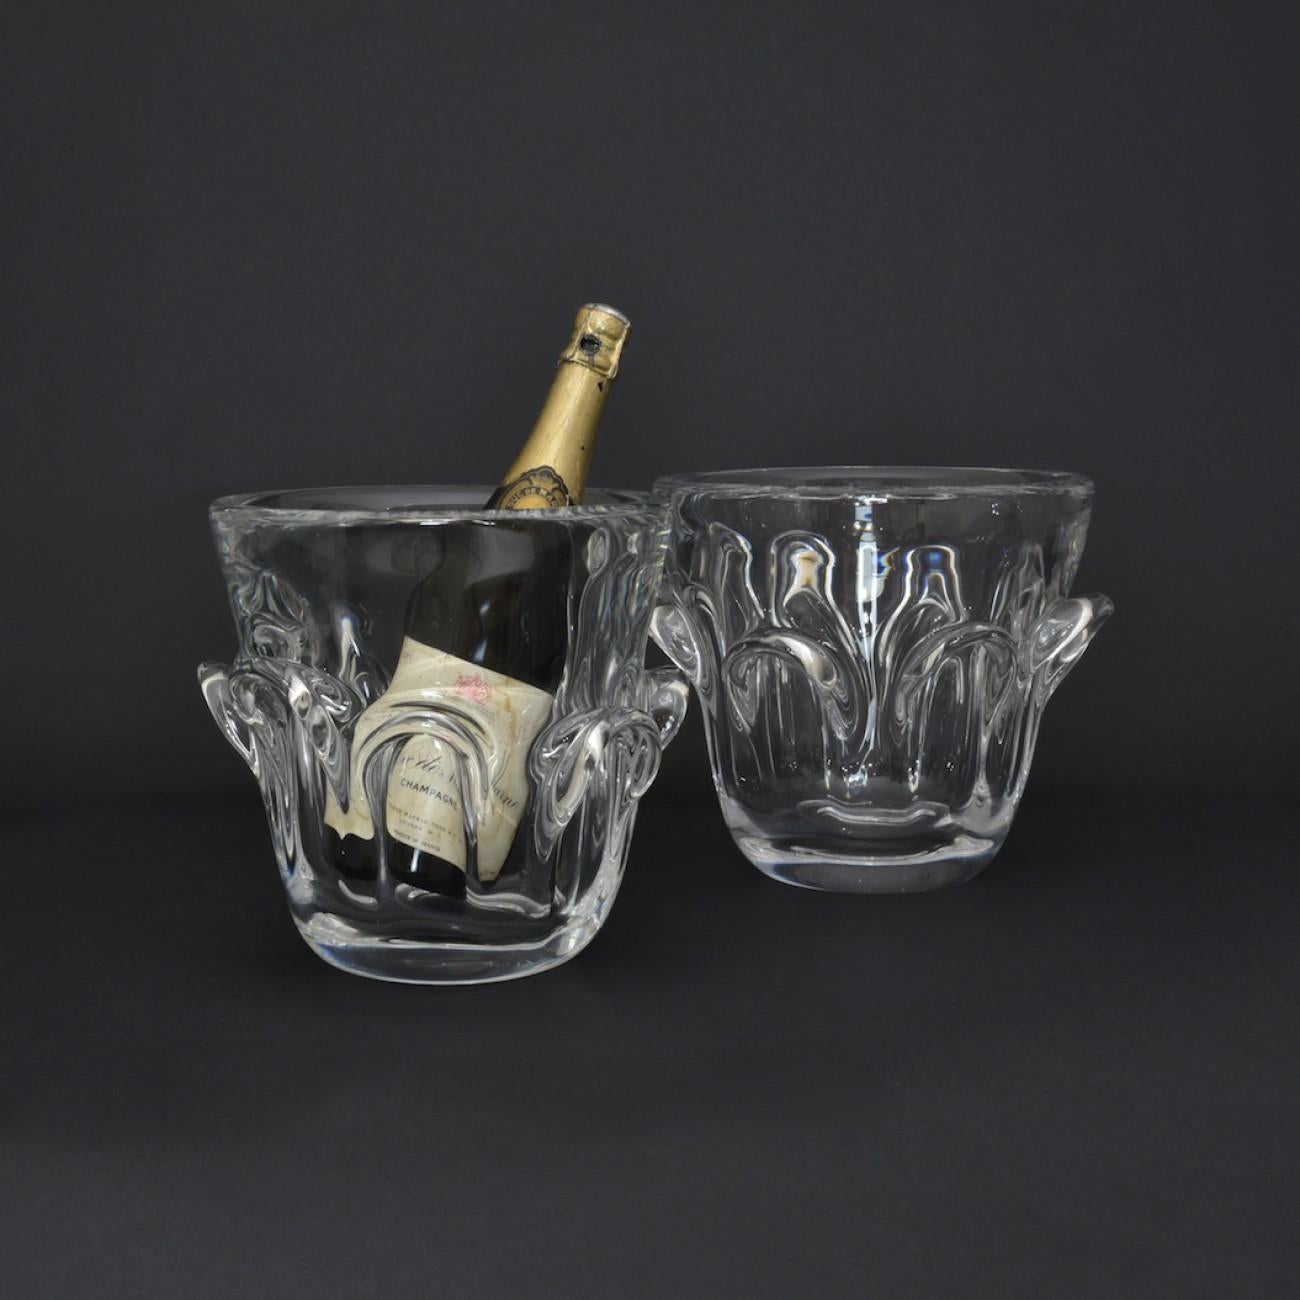 Handblown heavy crystal wine cooler by the renowned Belgian maker Val St Lambert who were established in 1826 and who's crystal is considered the clearest and brightest in the world.
These particular wine coolers were designed and made for the